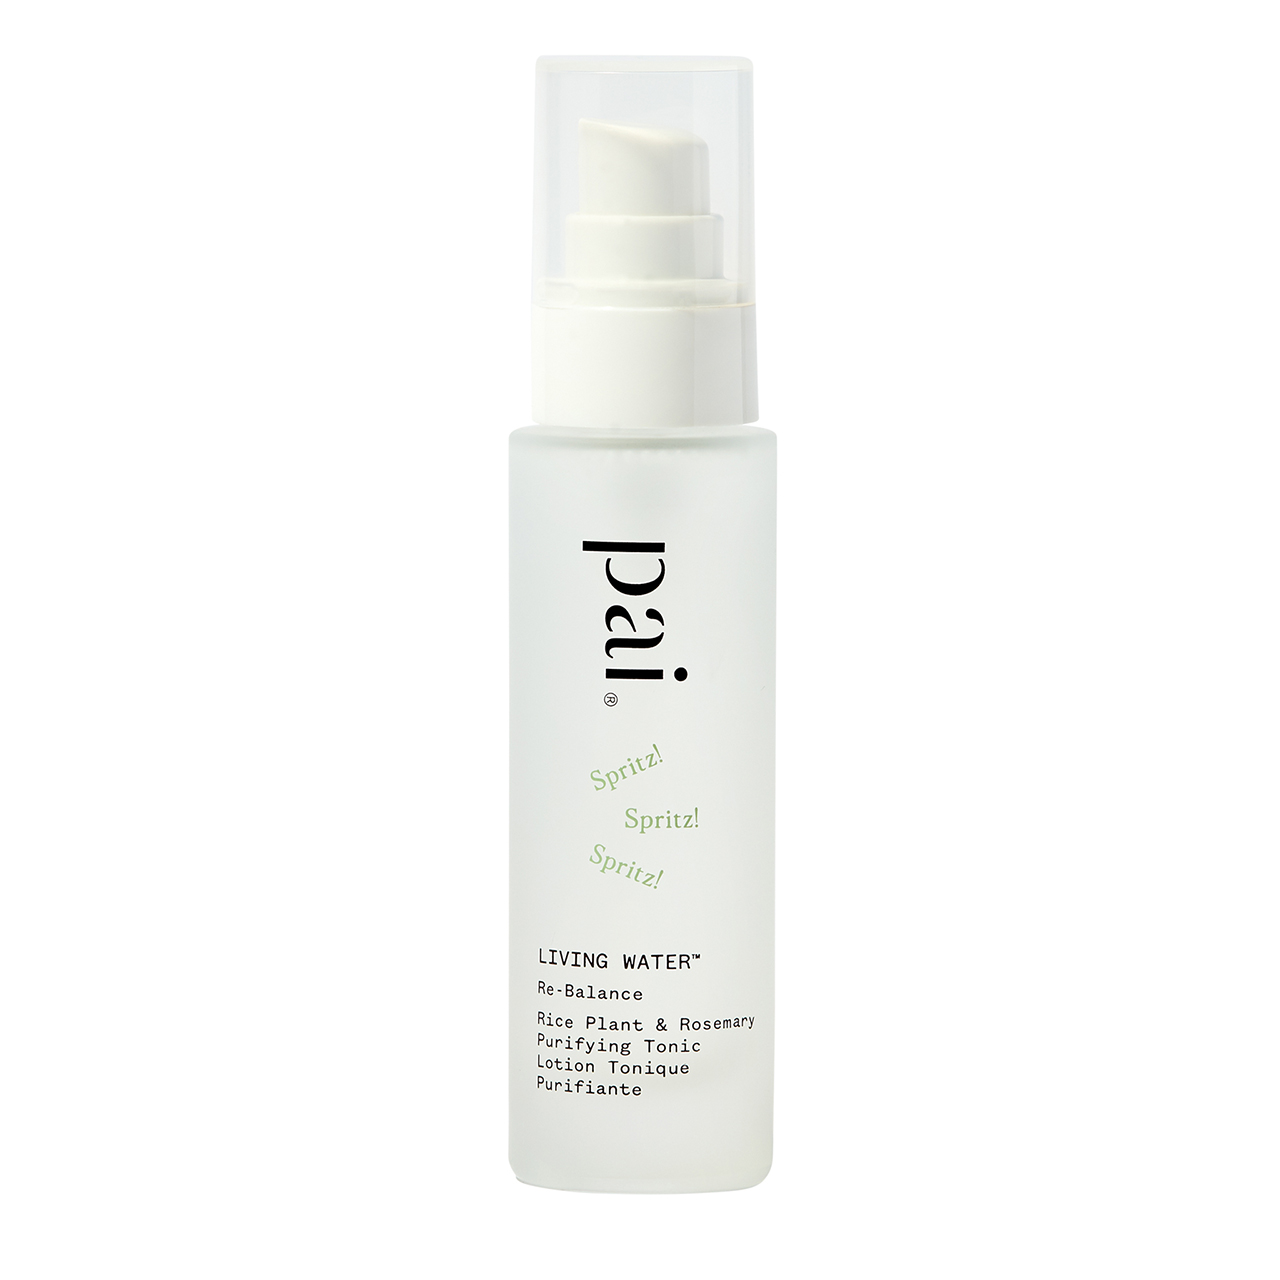 A photo of a bottle of Pai Skincare's Living Water